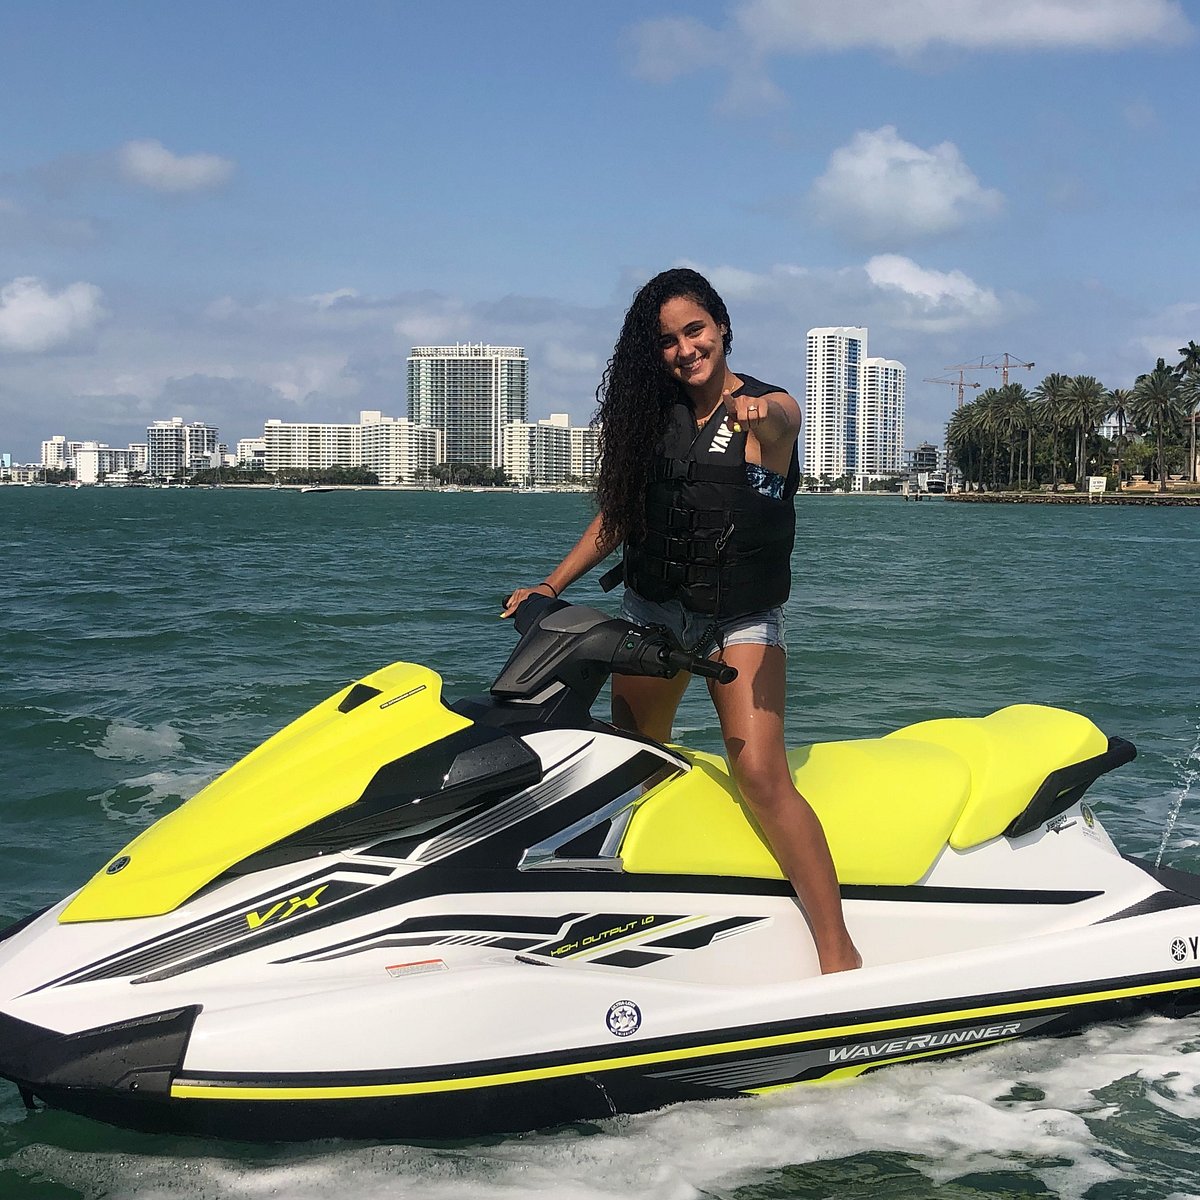 Jet Ski Tours of Miami (Reviews) - All You Need to Know BEFORE You Go